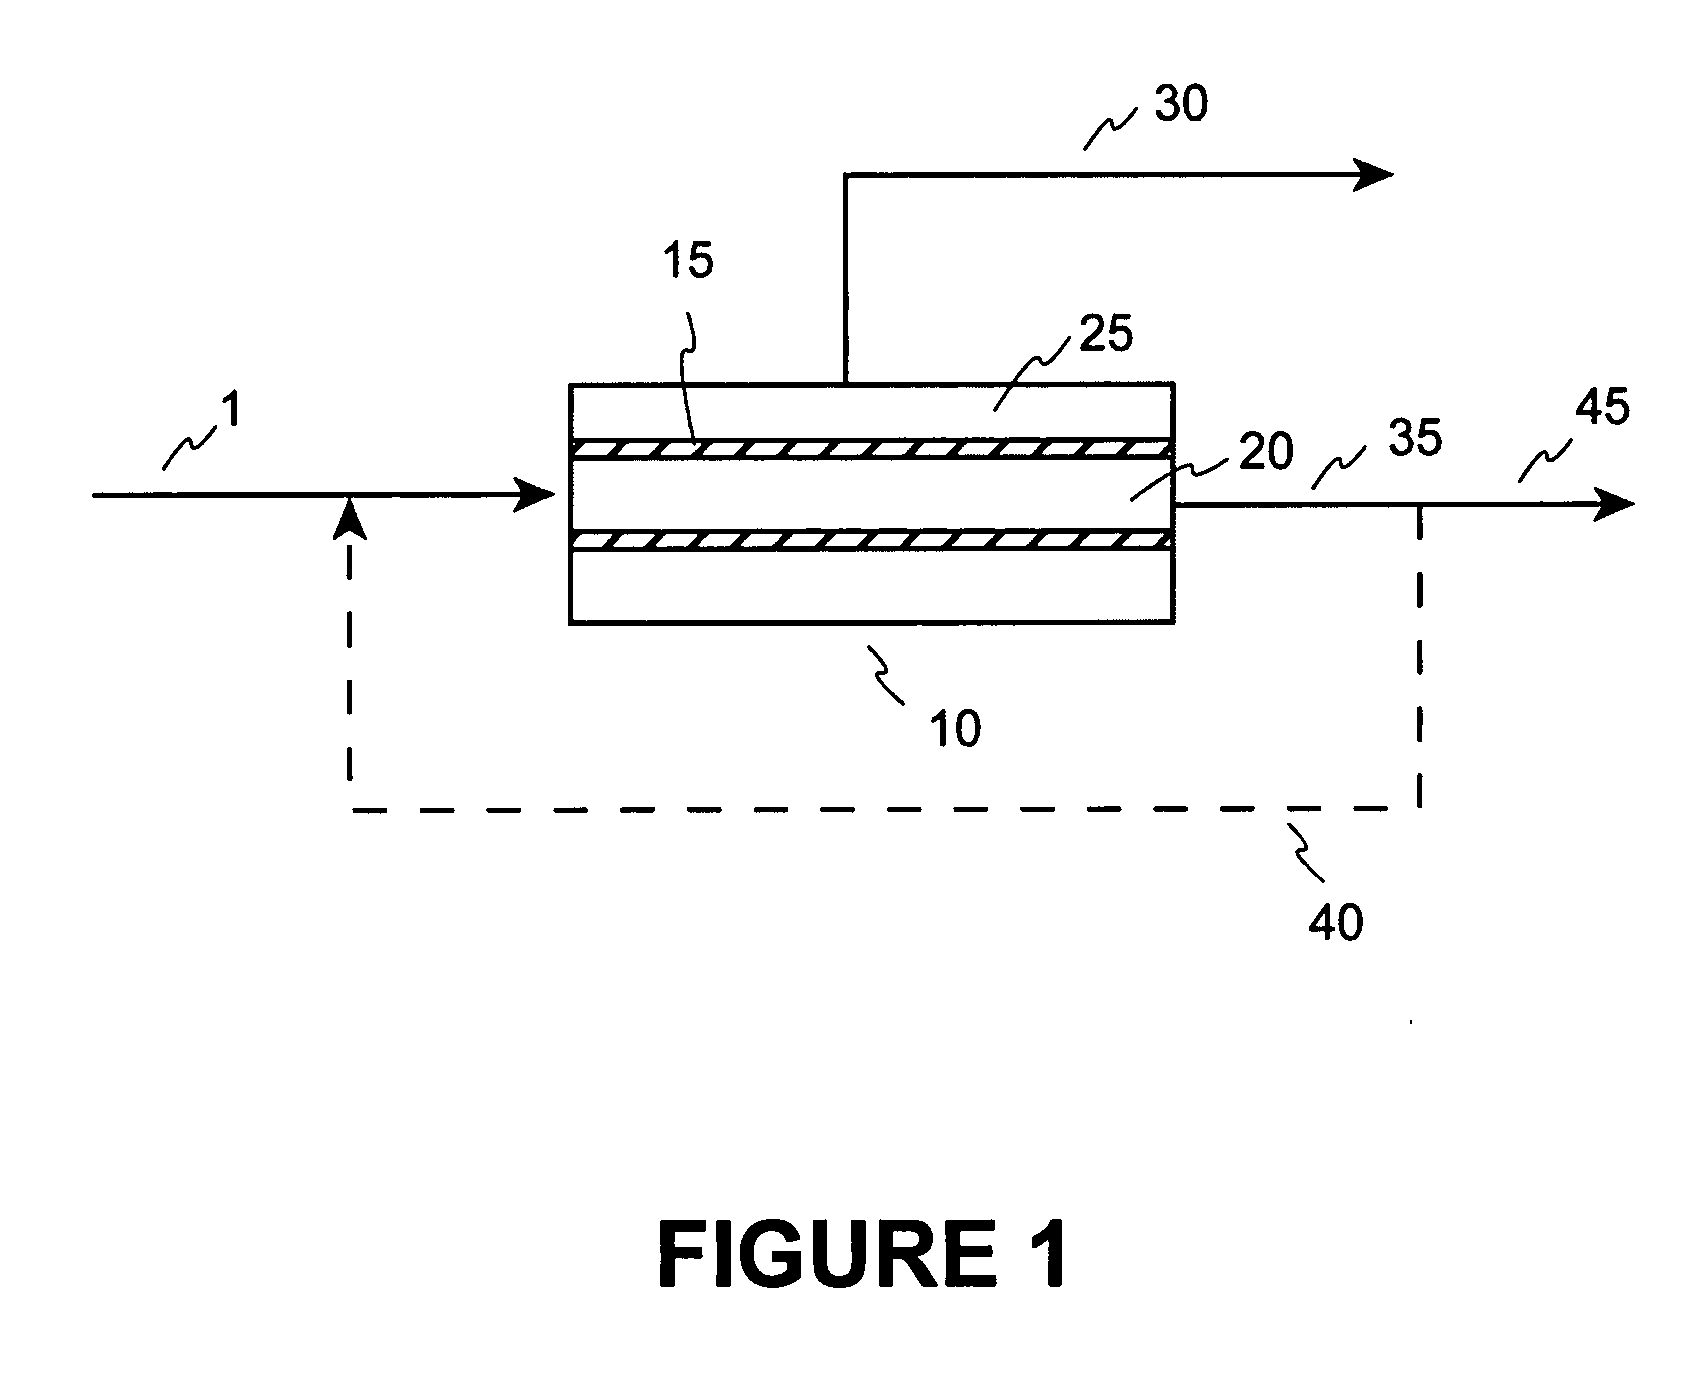 Process for separating a heavy oil feedstream into improved products